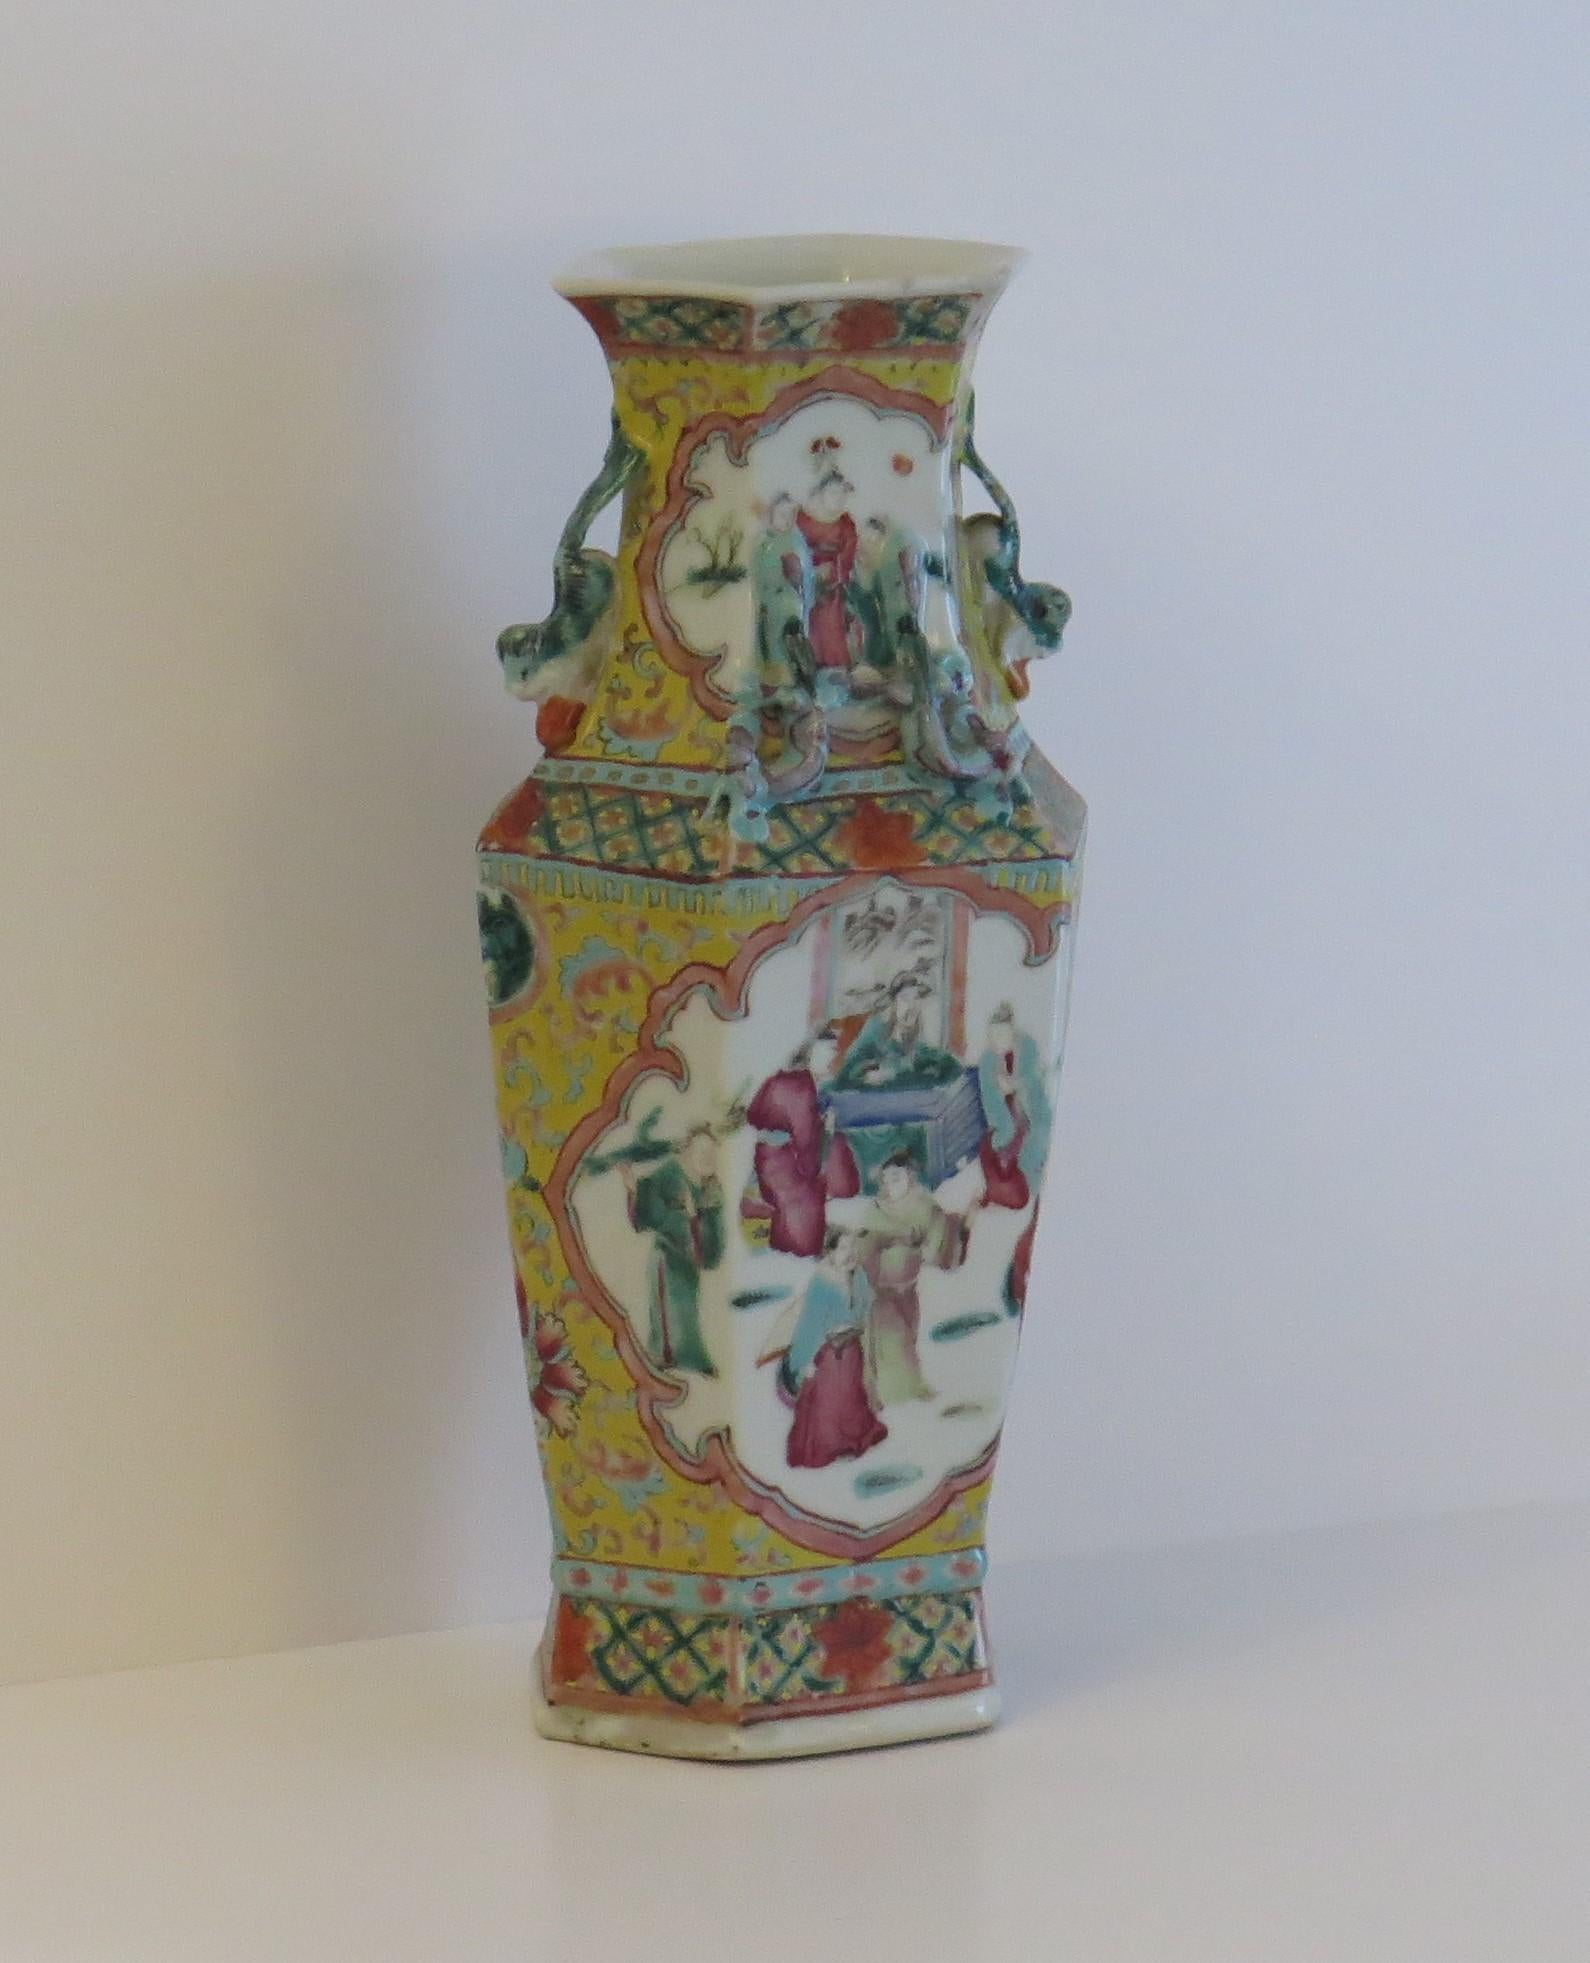 Chinese Export Vase Famille Rose Porcelain, Late Qing or Early Republic Period 2